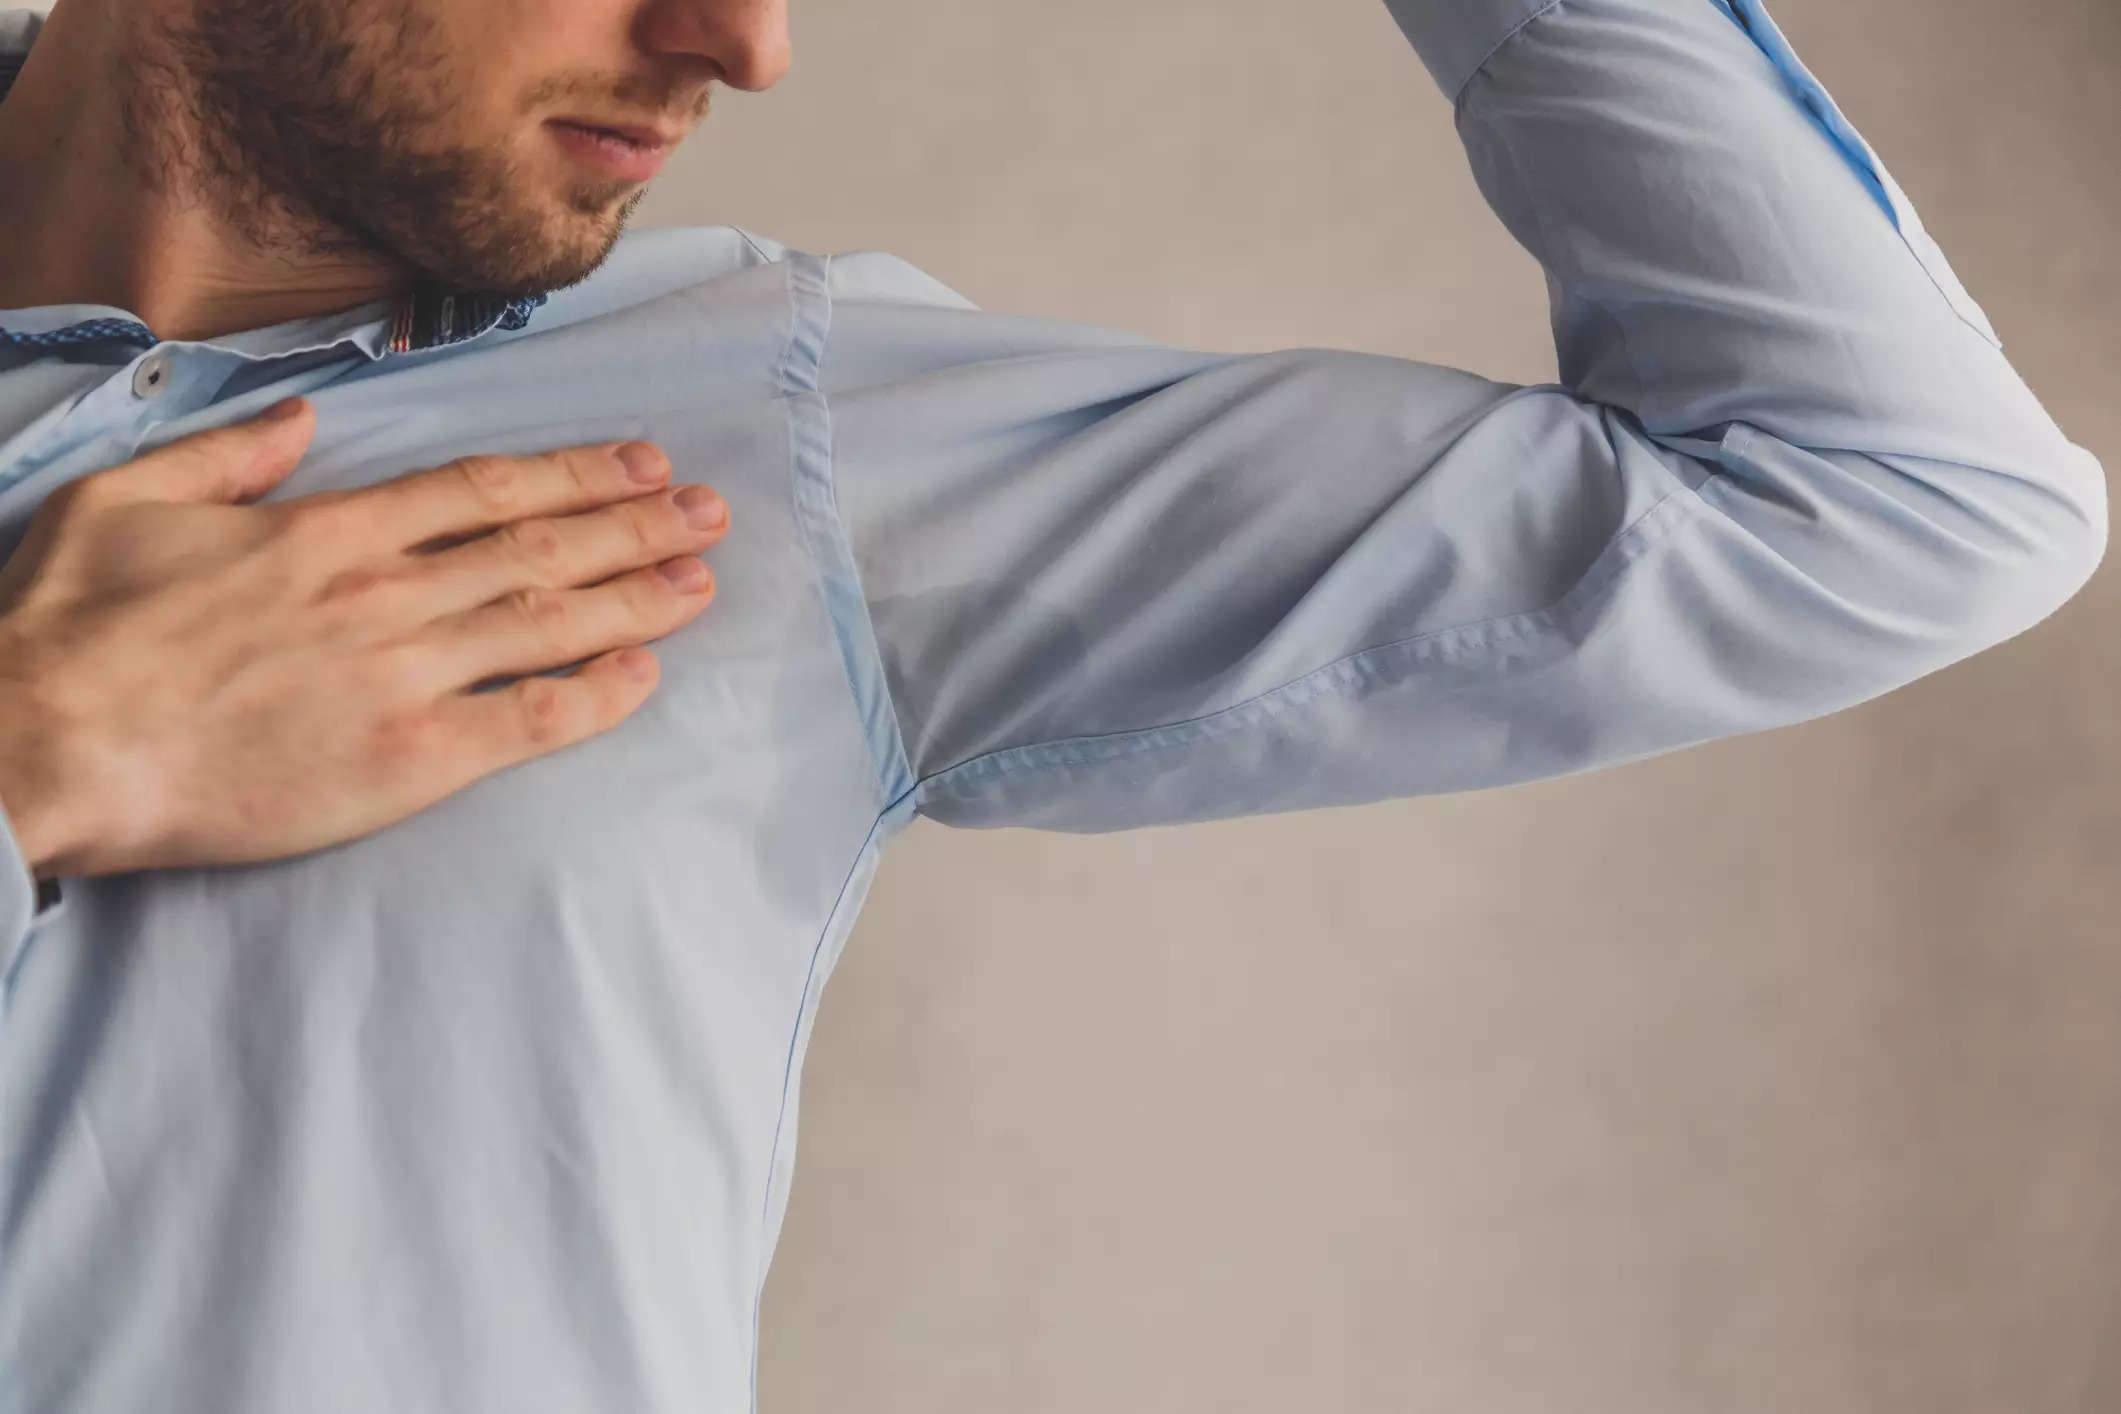 Experts say that adults who are diagnosed with controlled but high blood pressure reported the odours more often than those who did not have high BP.